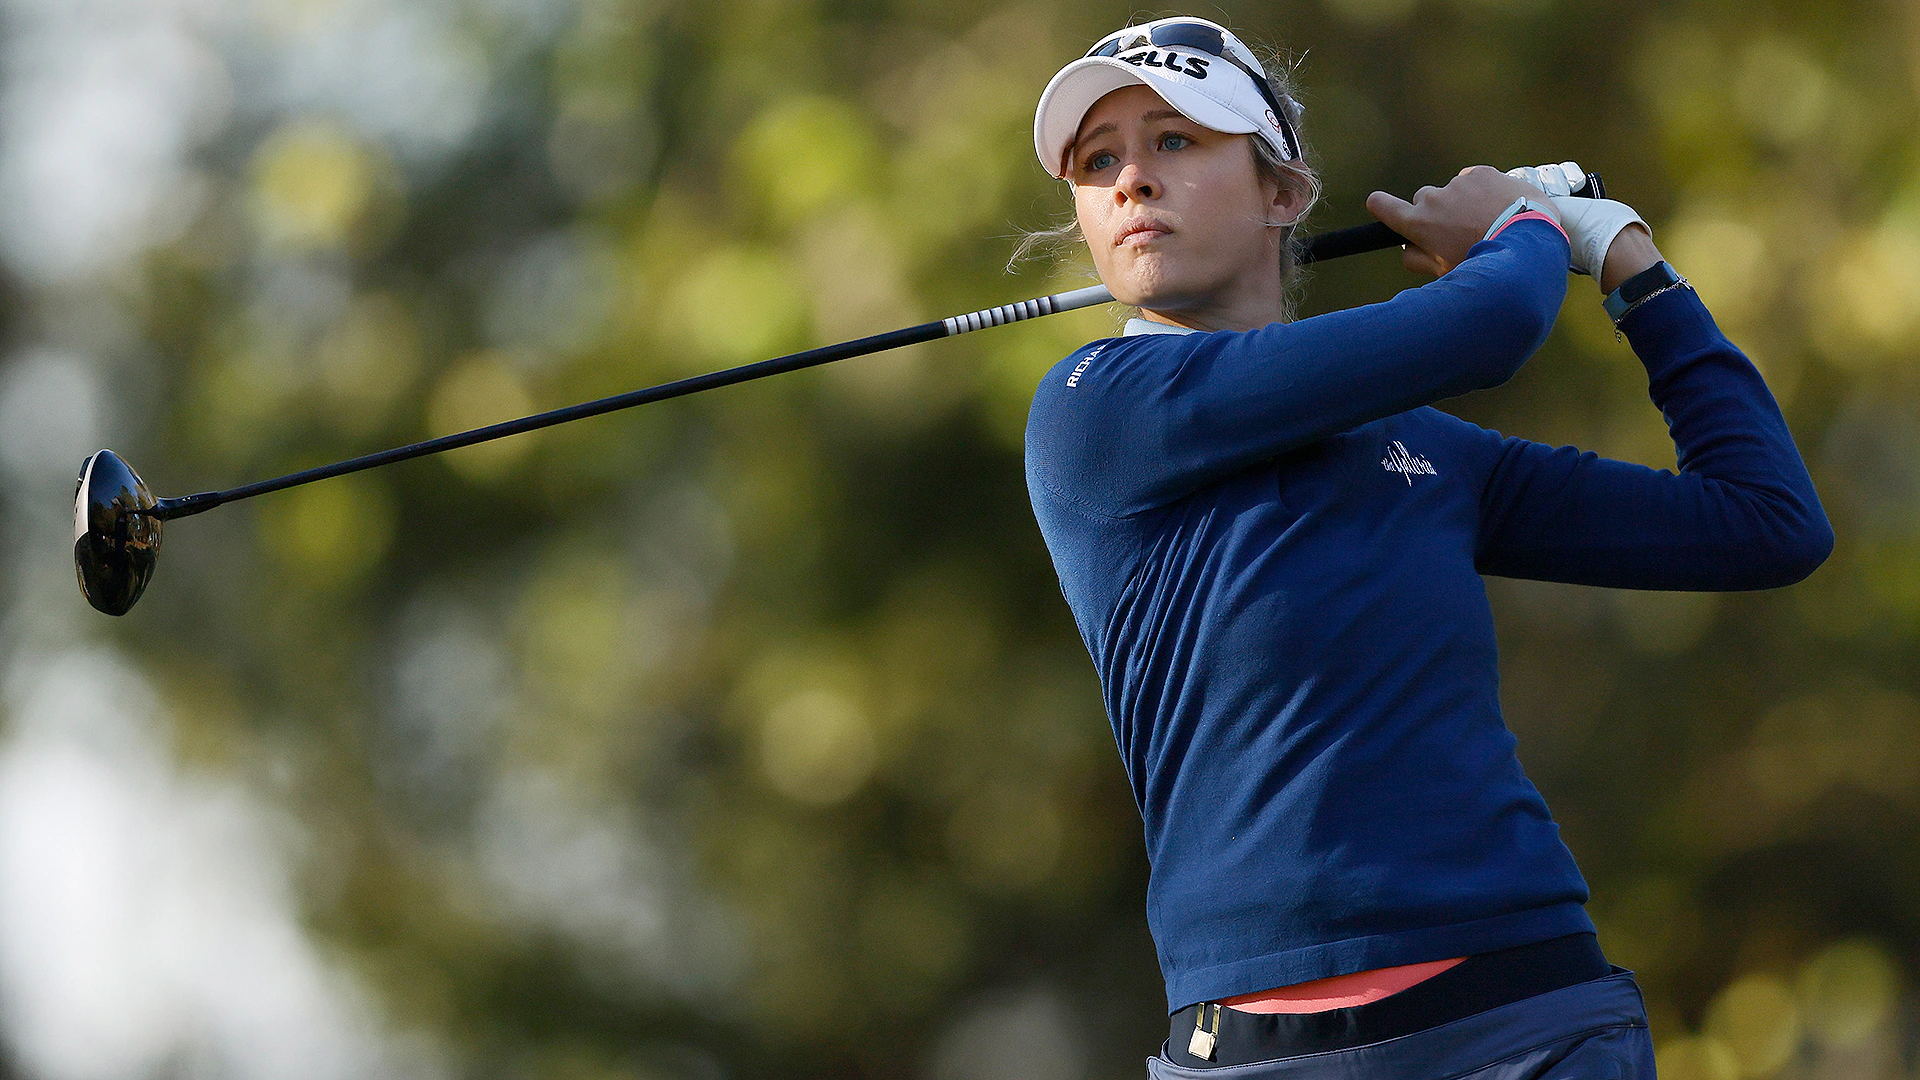 With just KPMG Women’s PGA left, U.S. women’s Olympic squad shaping up